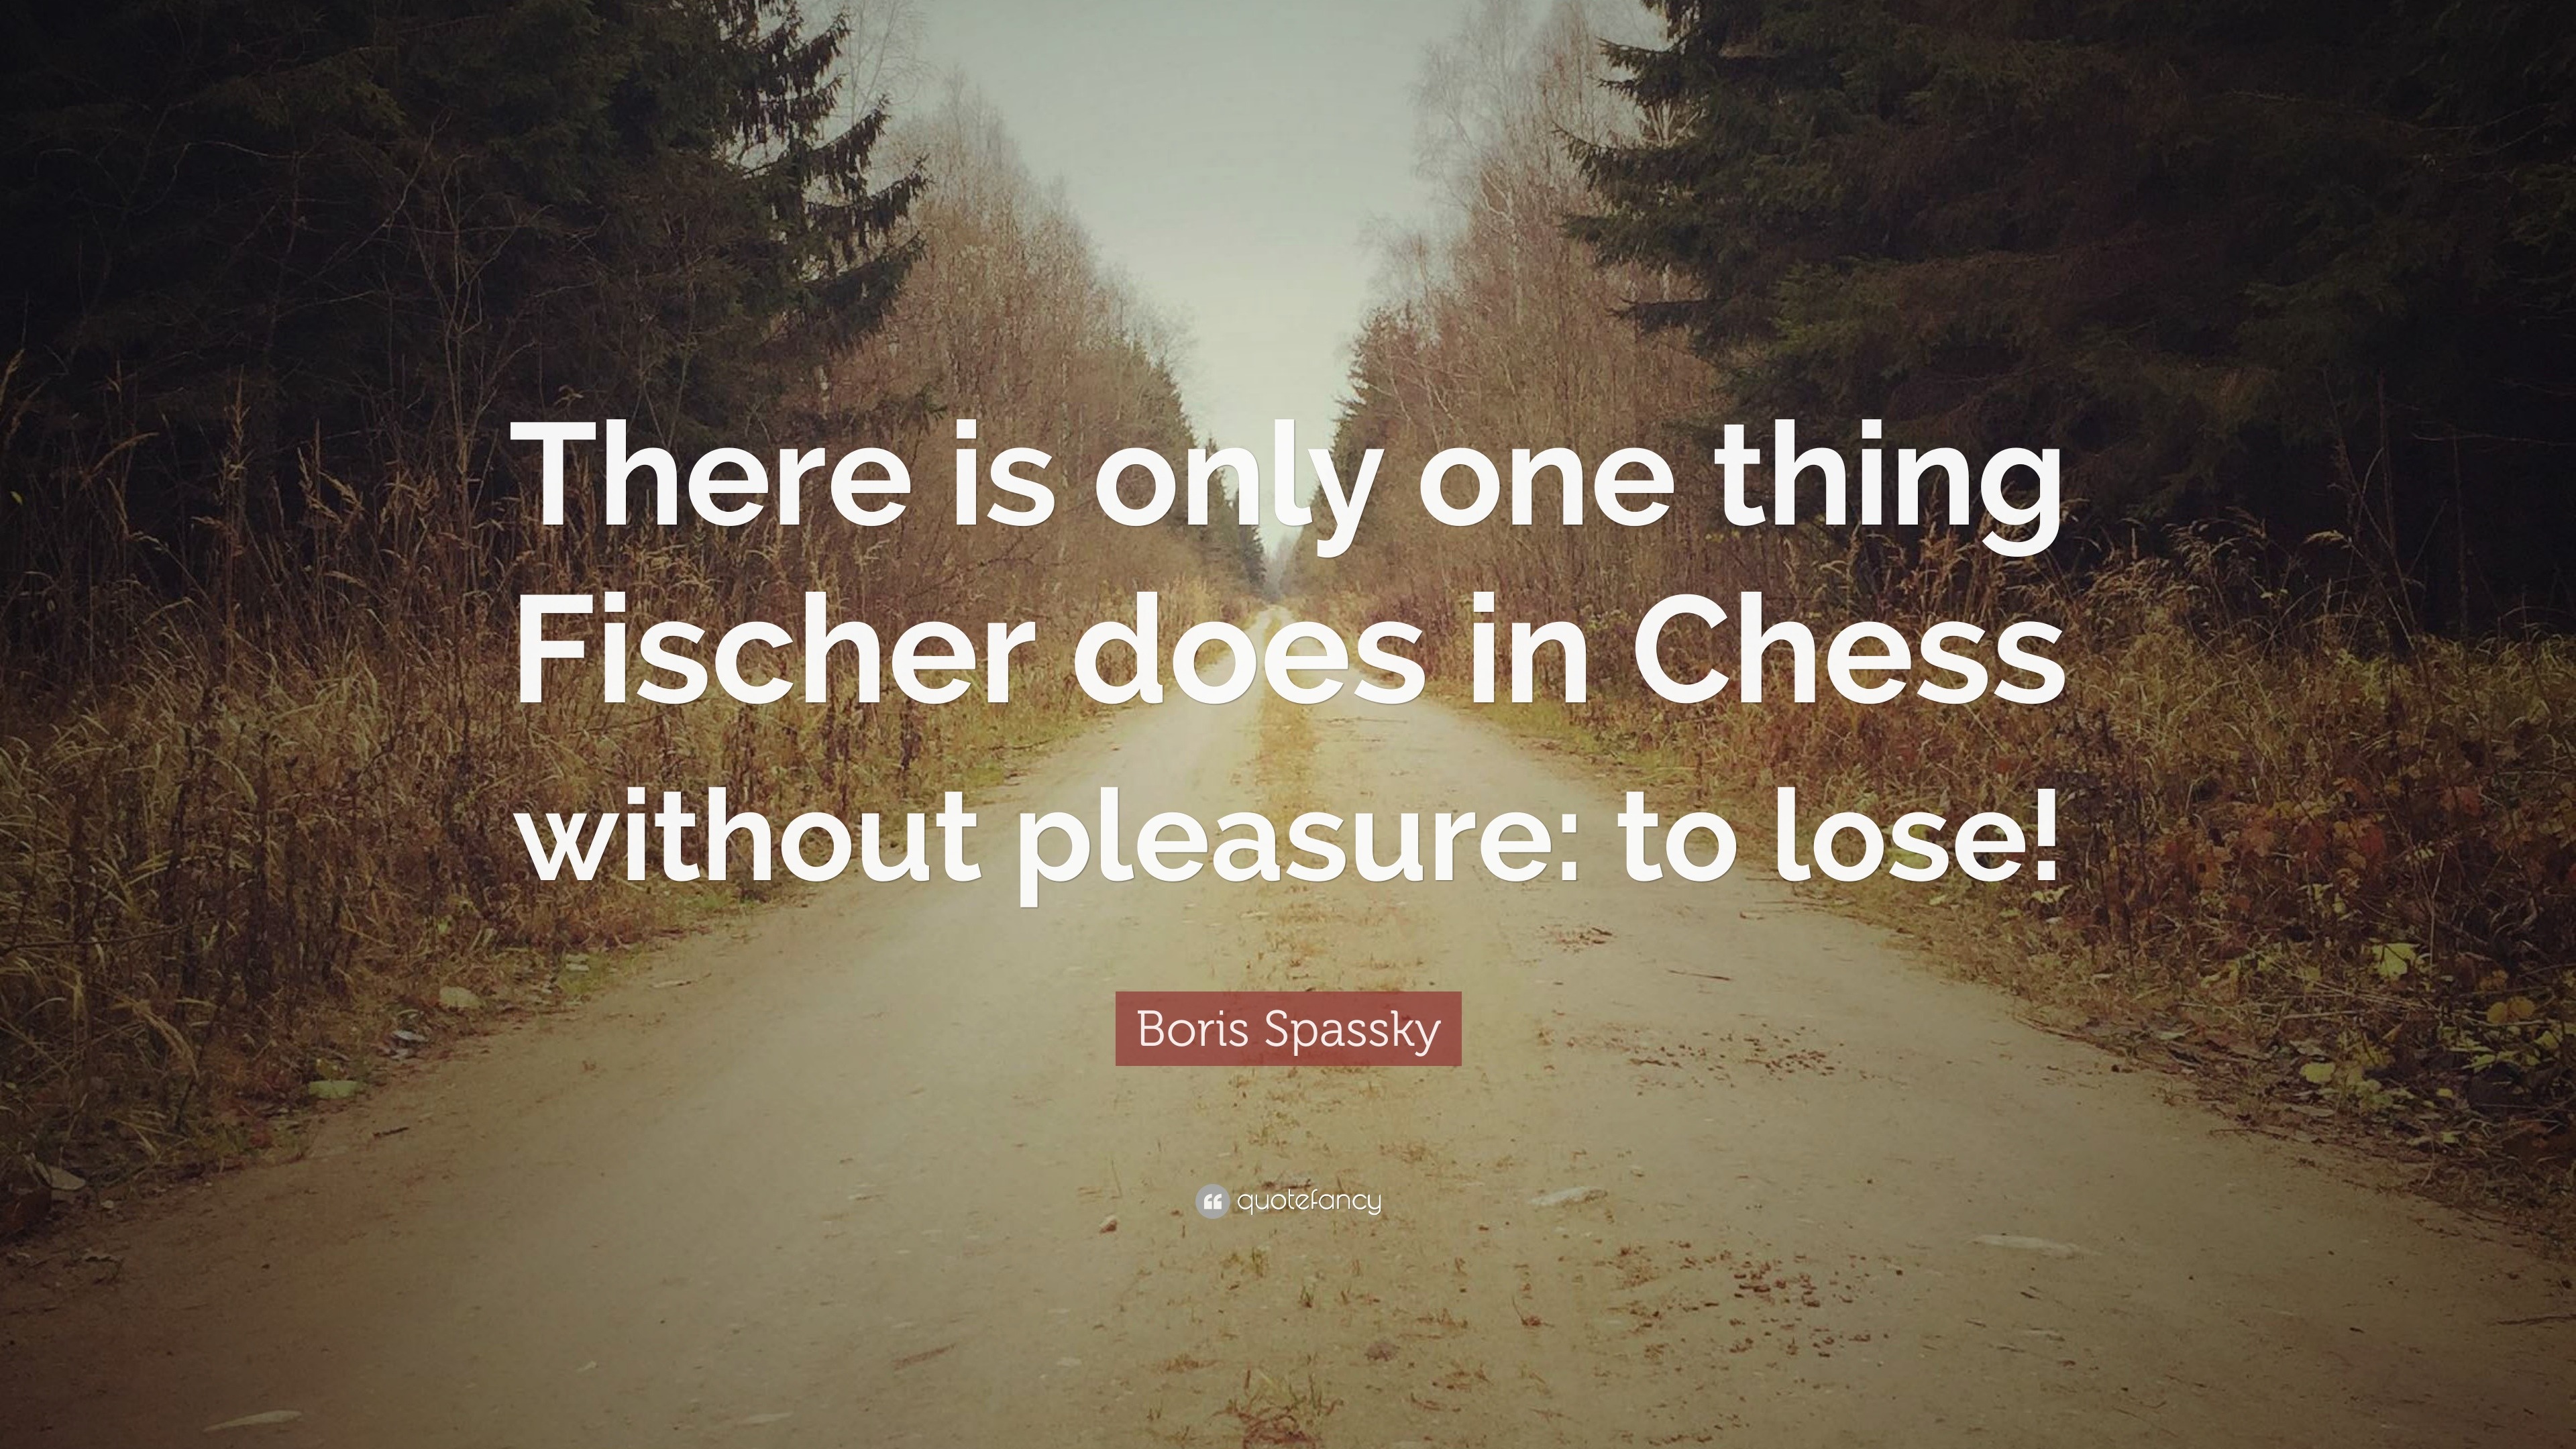 Chess.com - What do you think of Fischer's famous quote?